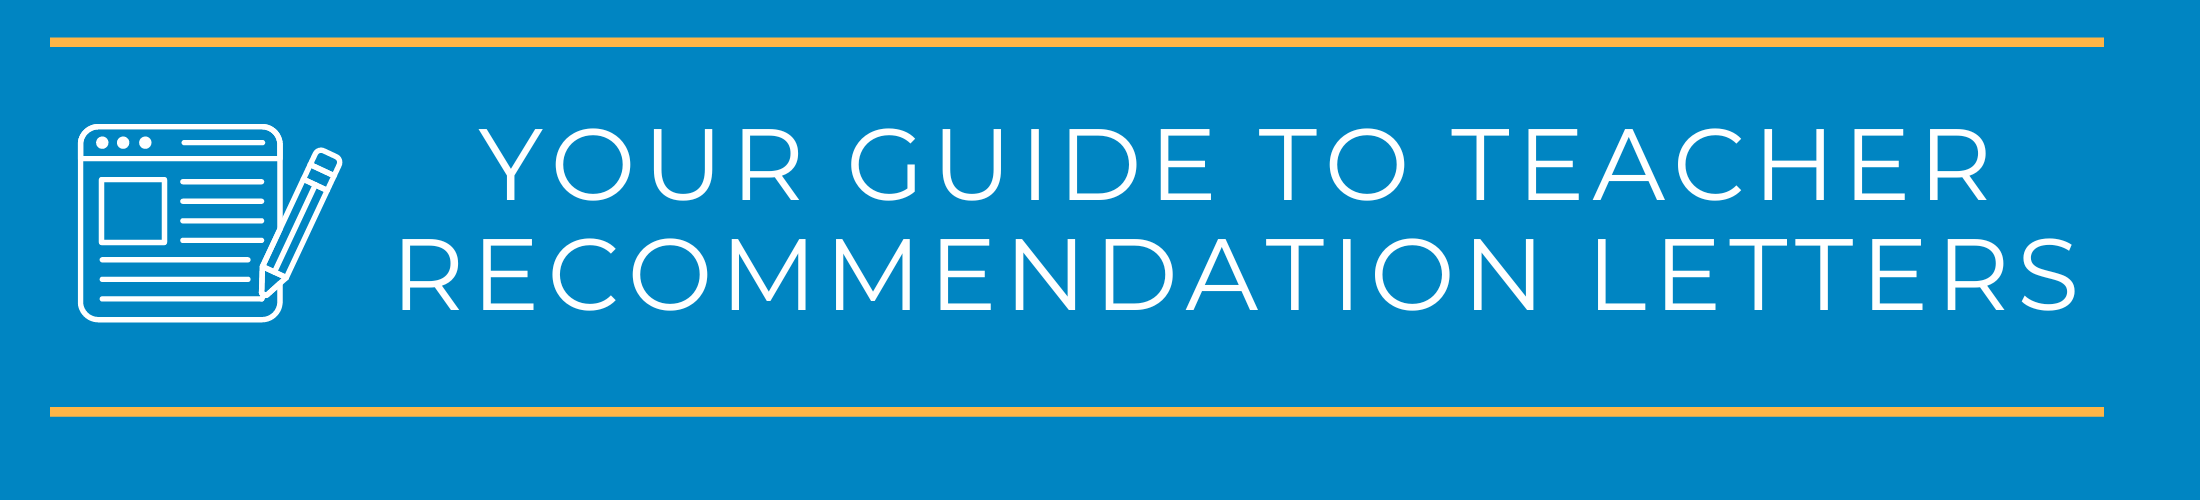 Your Guide to Teacher Recommendation Letters